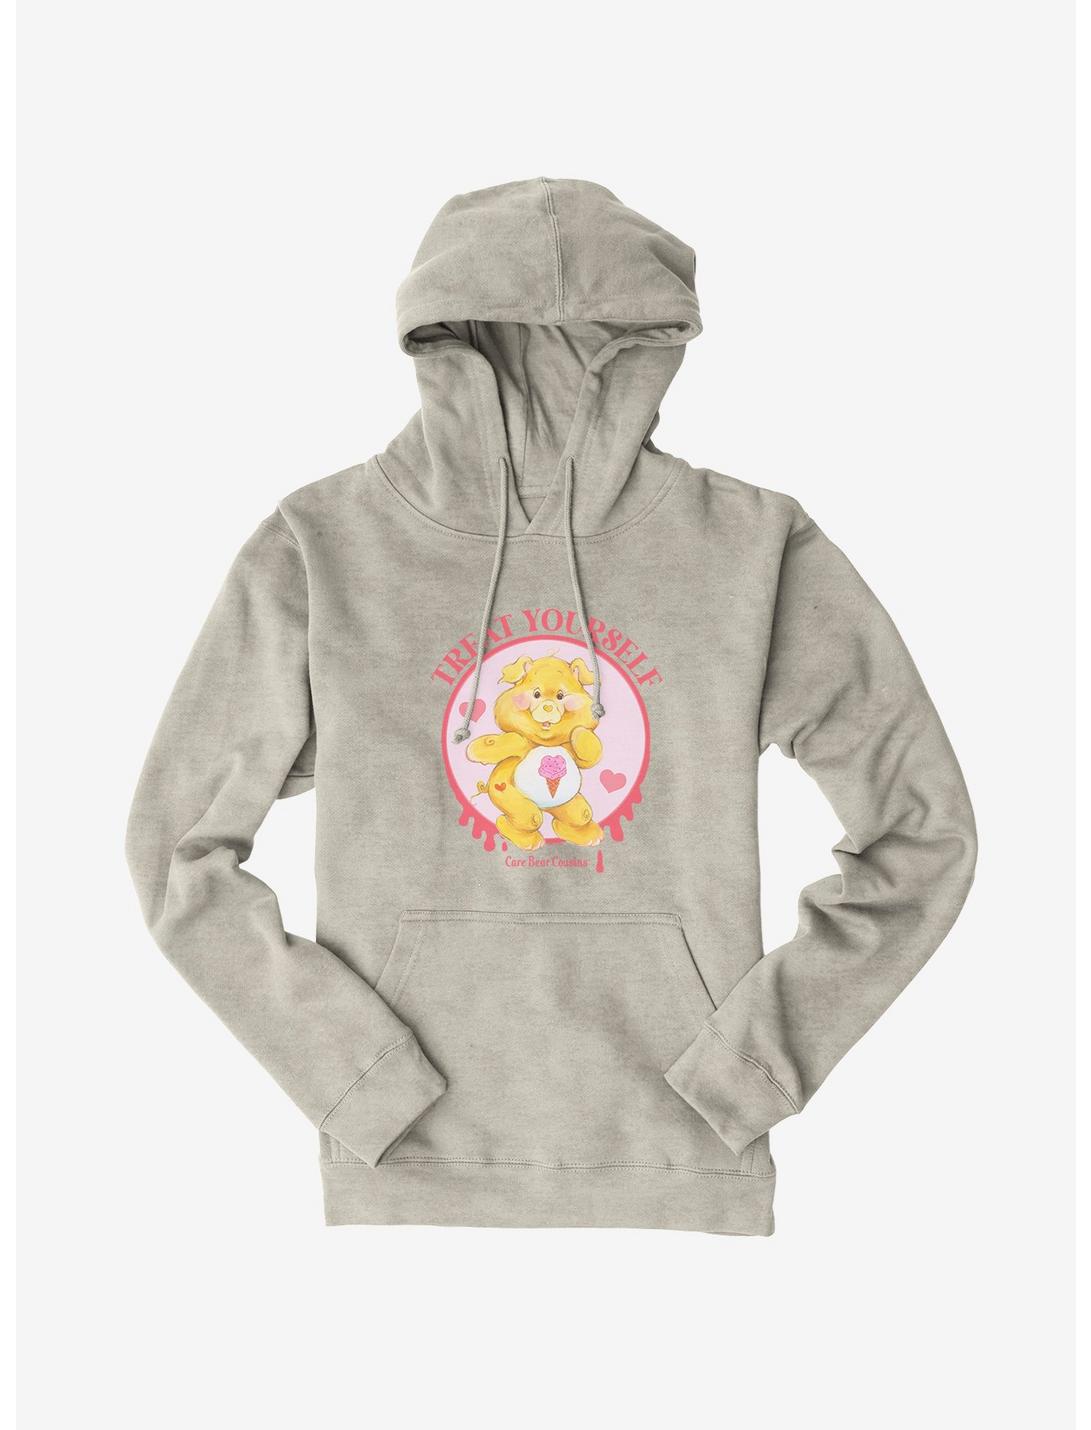 Care Bear Cousins Treat Heart Pig Treat Yourself Hoodie, OATMEAL HEATHER, hi-res